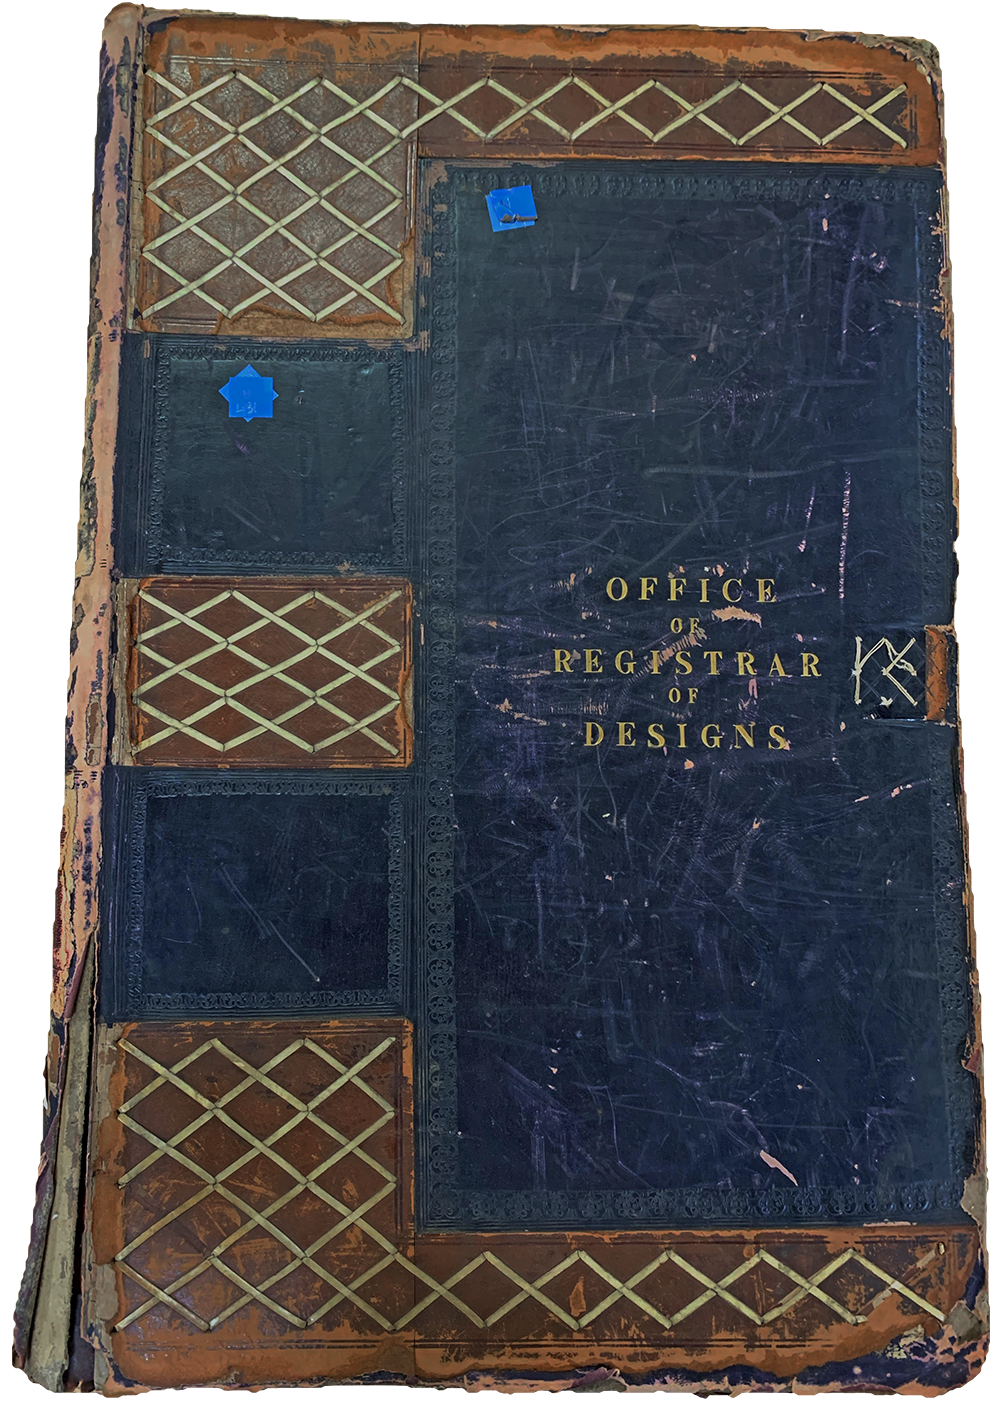 The cover of a blue book, titled Office of Registrar of Designs.